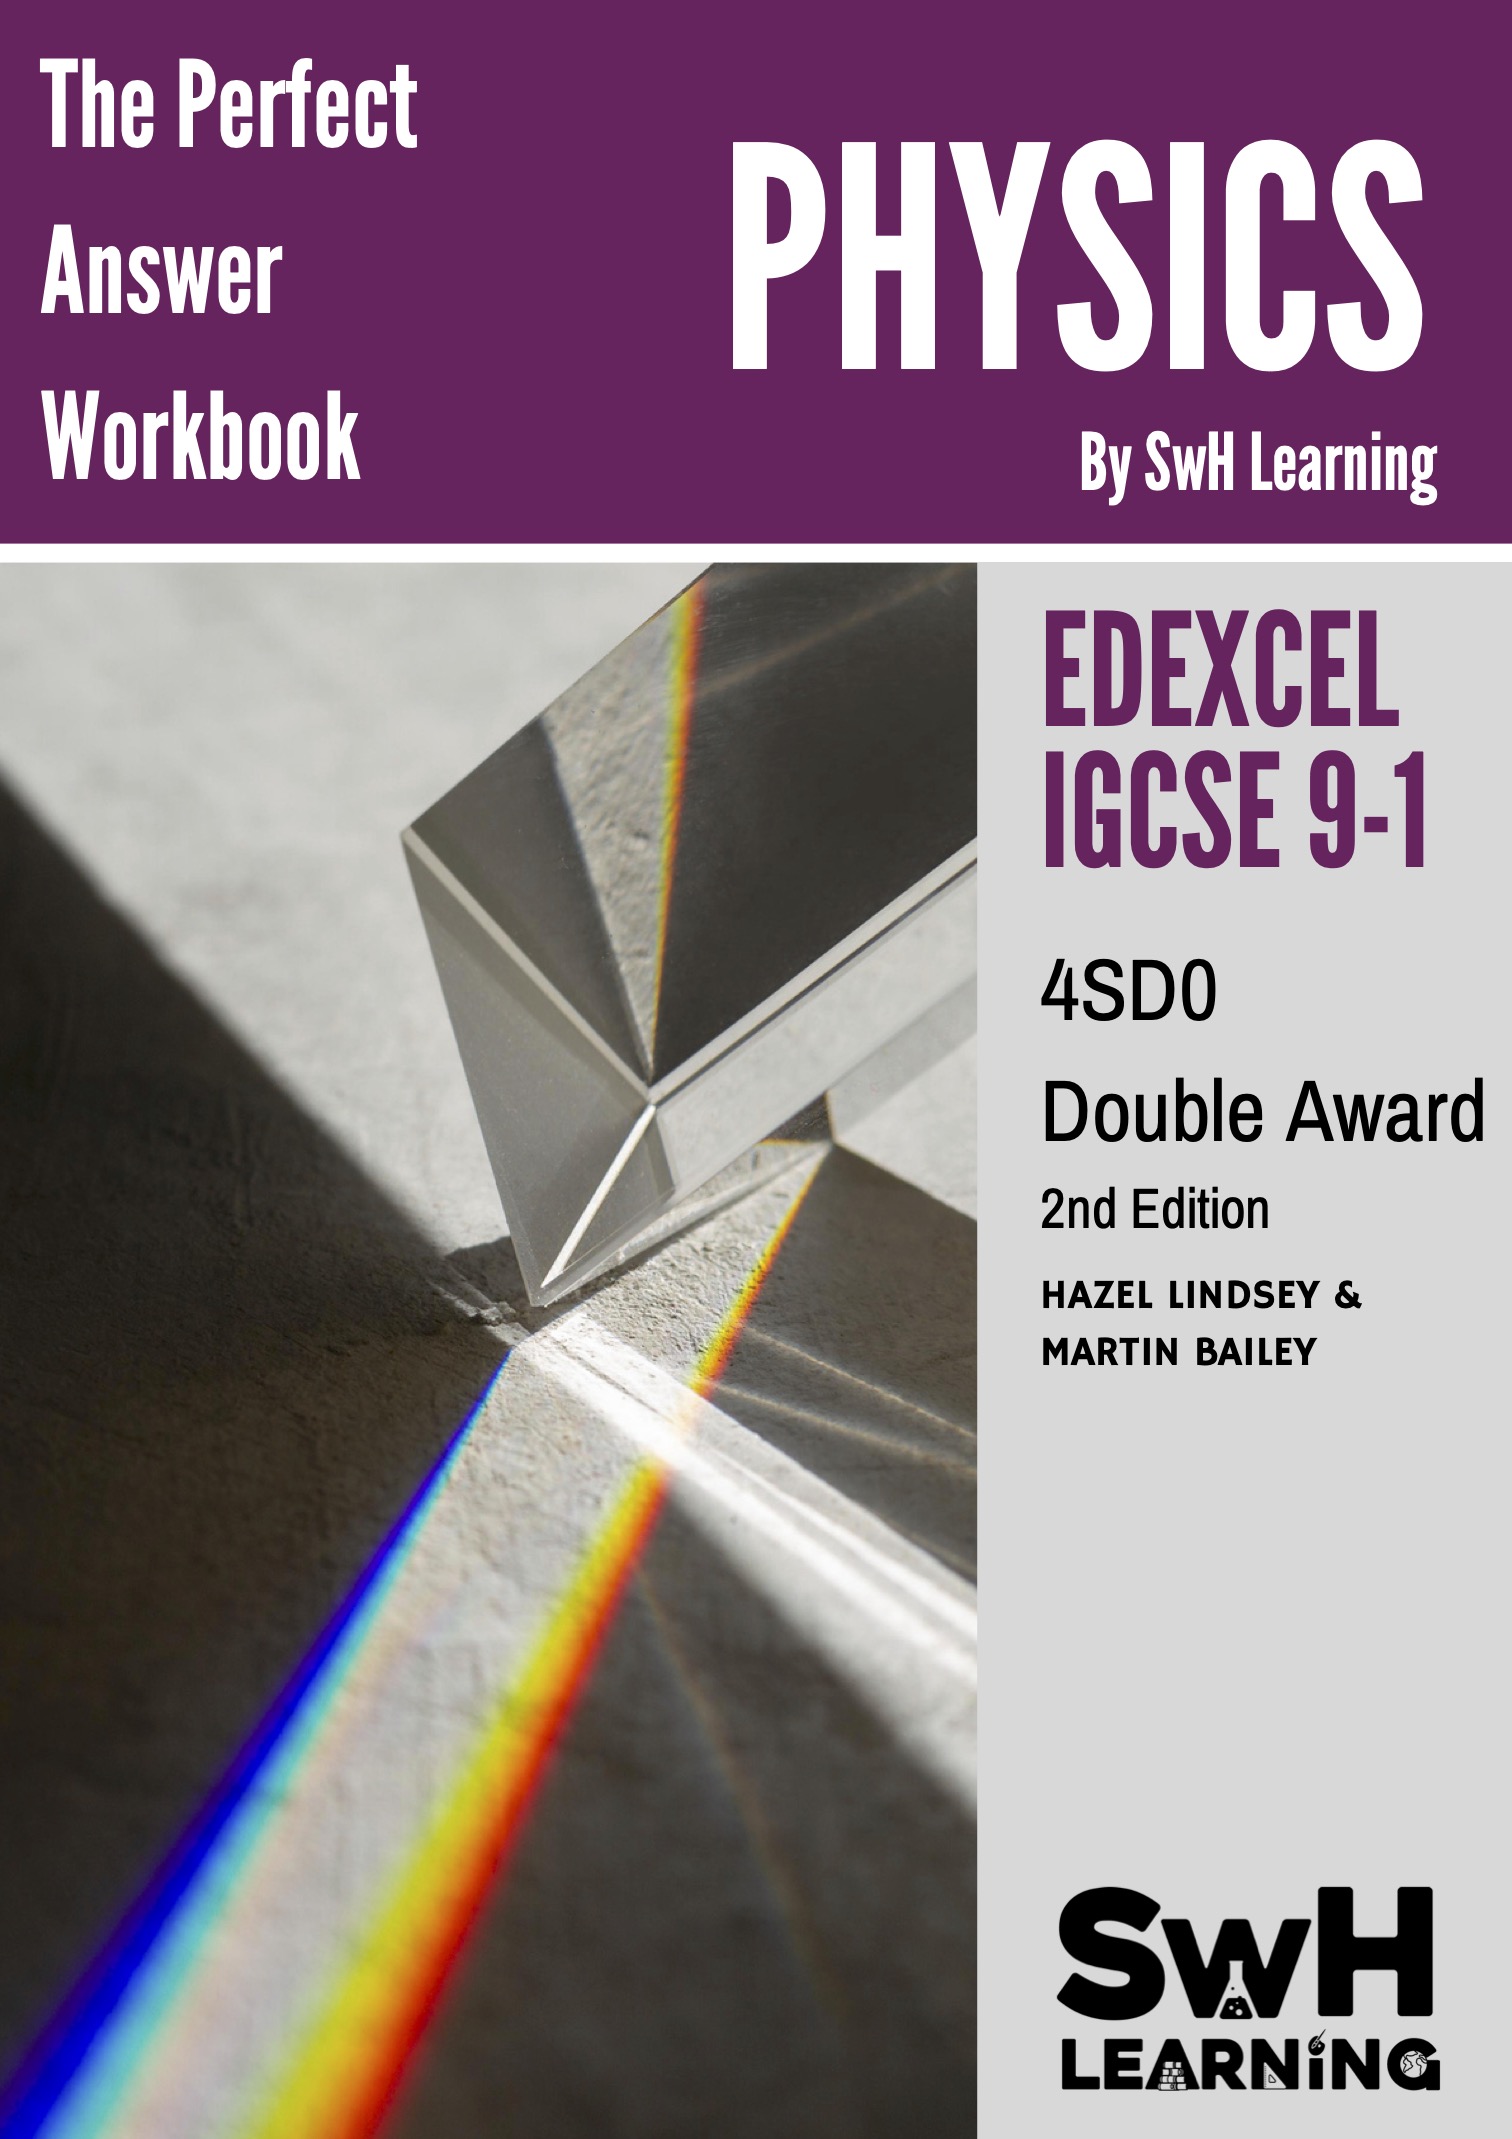 The Perfect Answer Workbook (INCLUDING ANSWERS) – Edexcel IGCSE Biology 9-1  (Triple Award) – SWH Learning